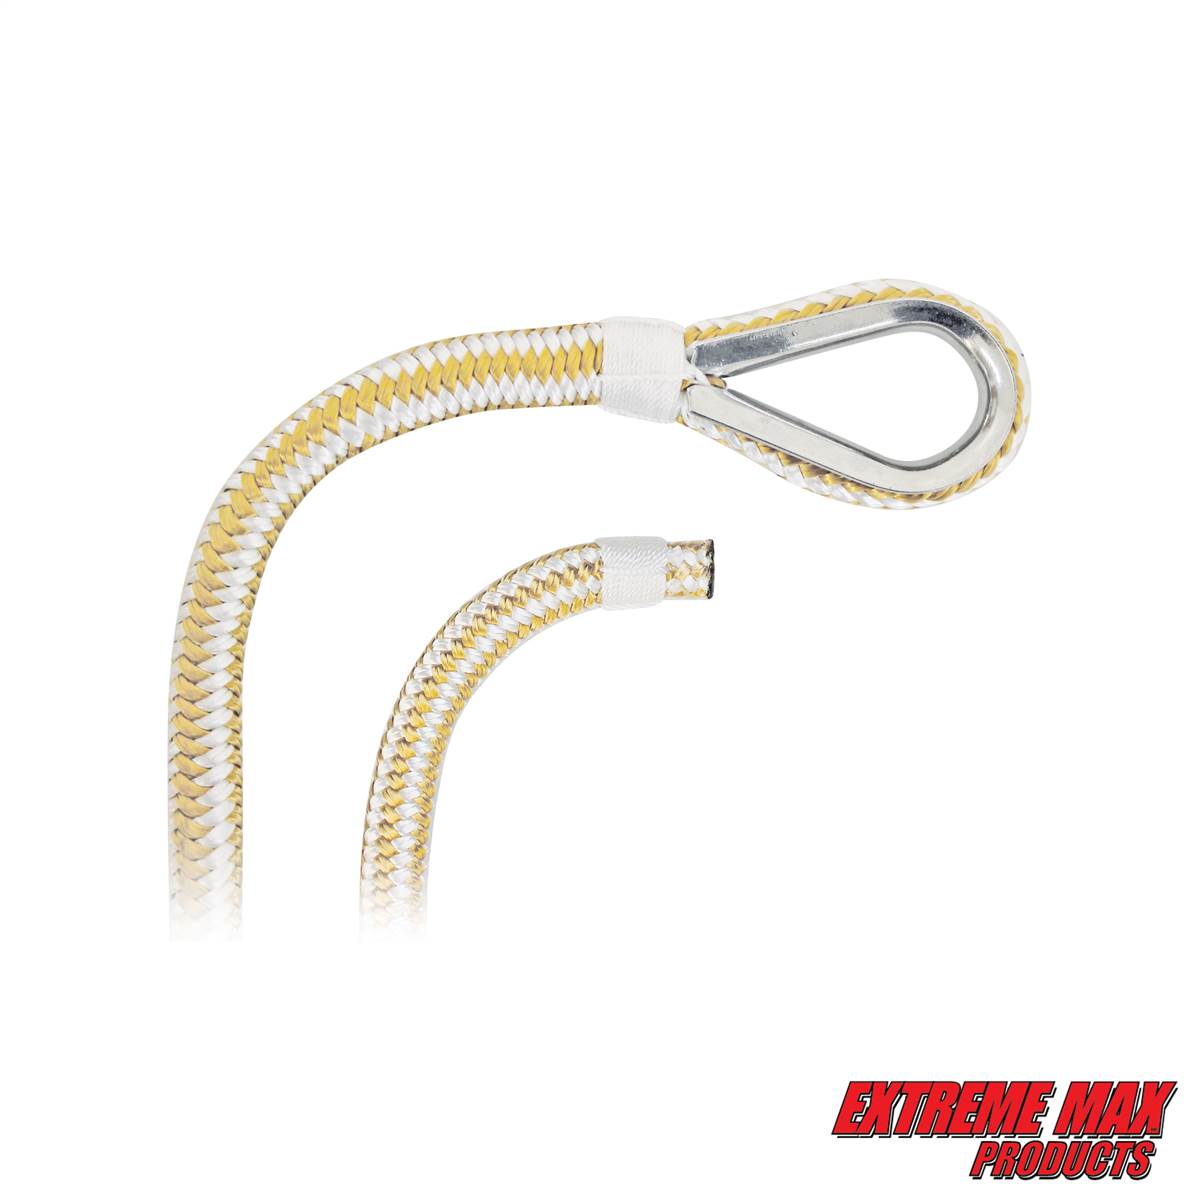 Extreme Max 3006.2270 BoatTector 1/2 x 600' Premium Double Braid Nylon  Anchor Line with Thimble - White & Gold